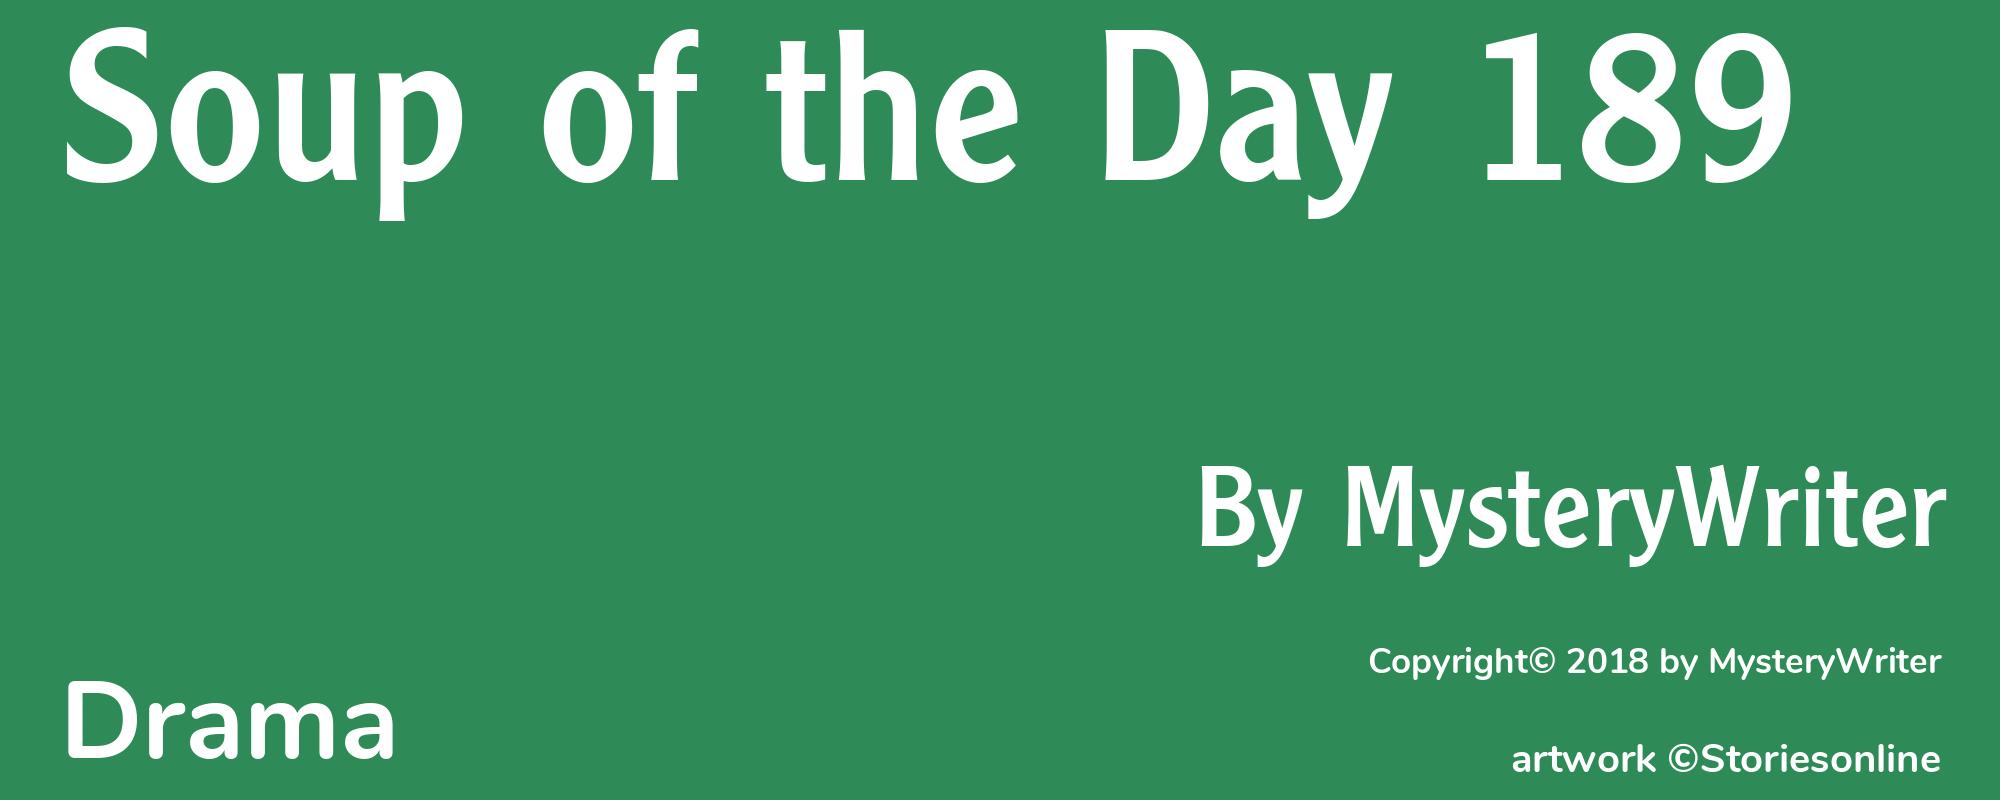 Soup of the Day 189 - Cover